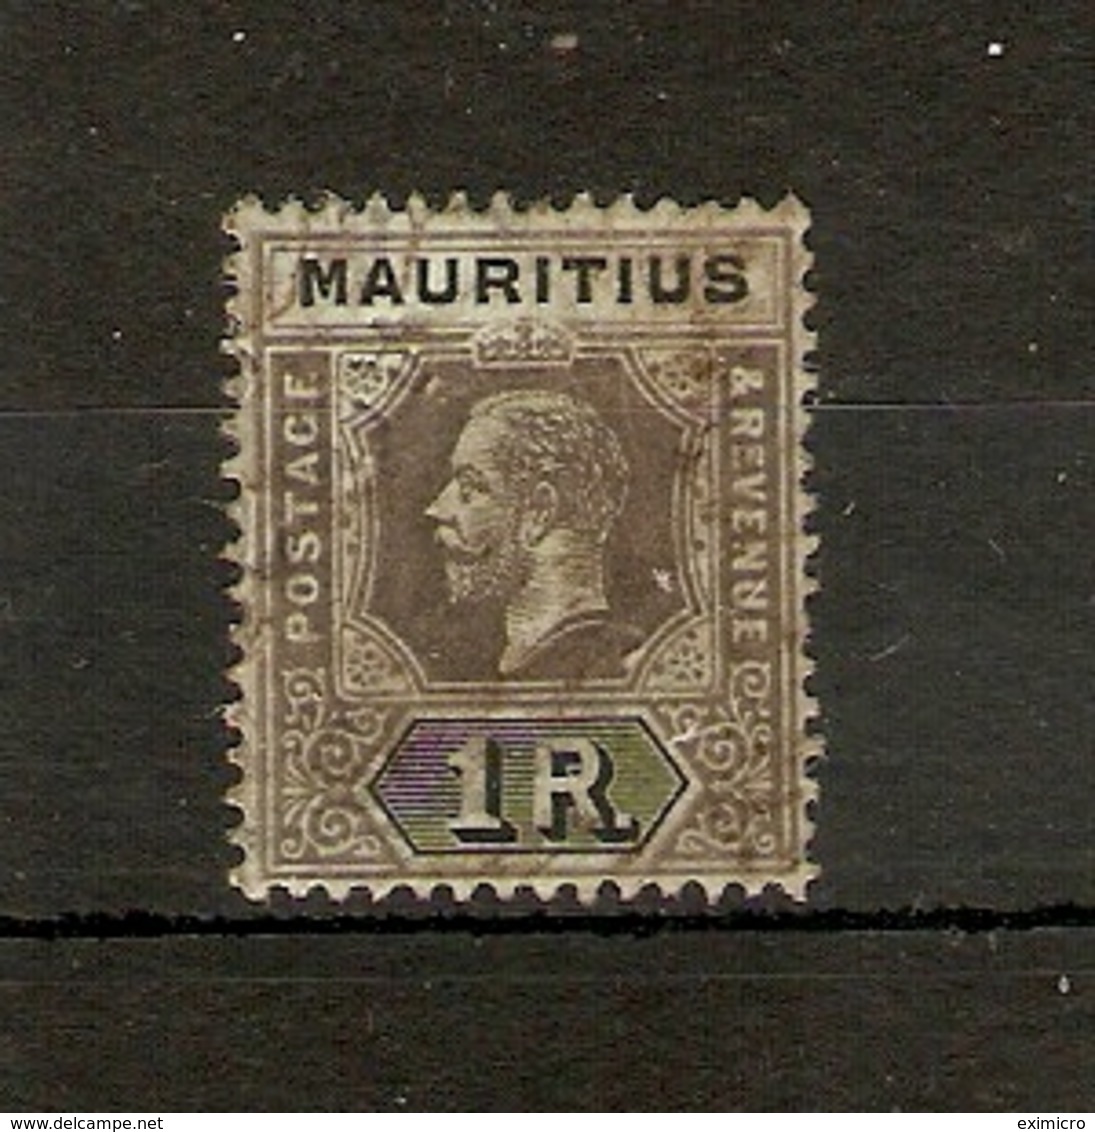 MAURITIUS 1917 1R BLACK/BLUE GREEN (OLIVE BACK) SG 201 WATERMARK MULTIPLE CROWN CA FINE USED Cat £25 - Mauritius (...-1967)